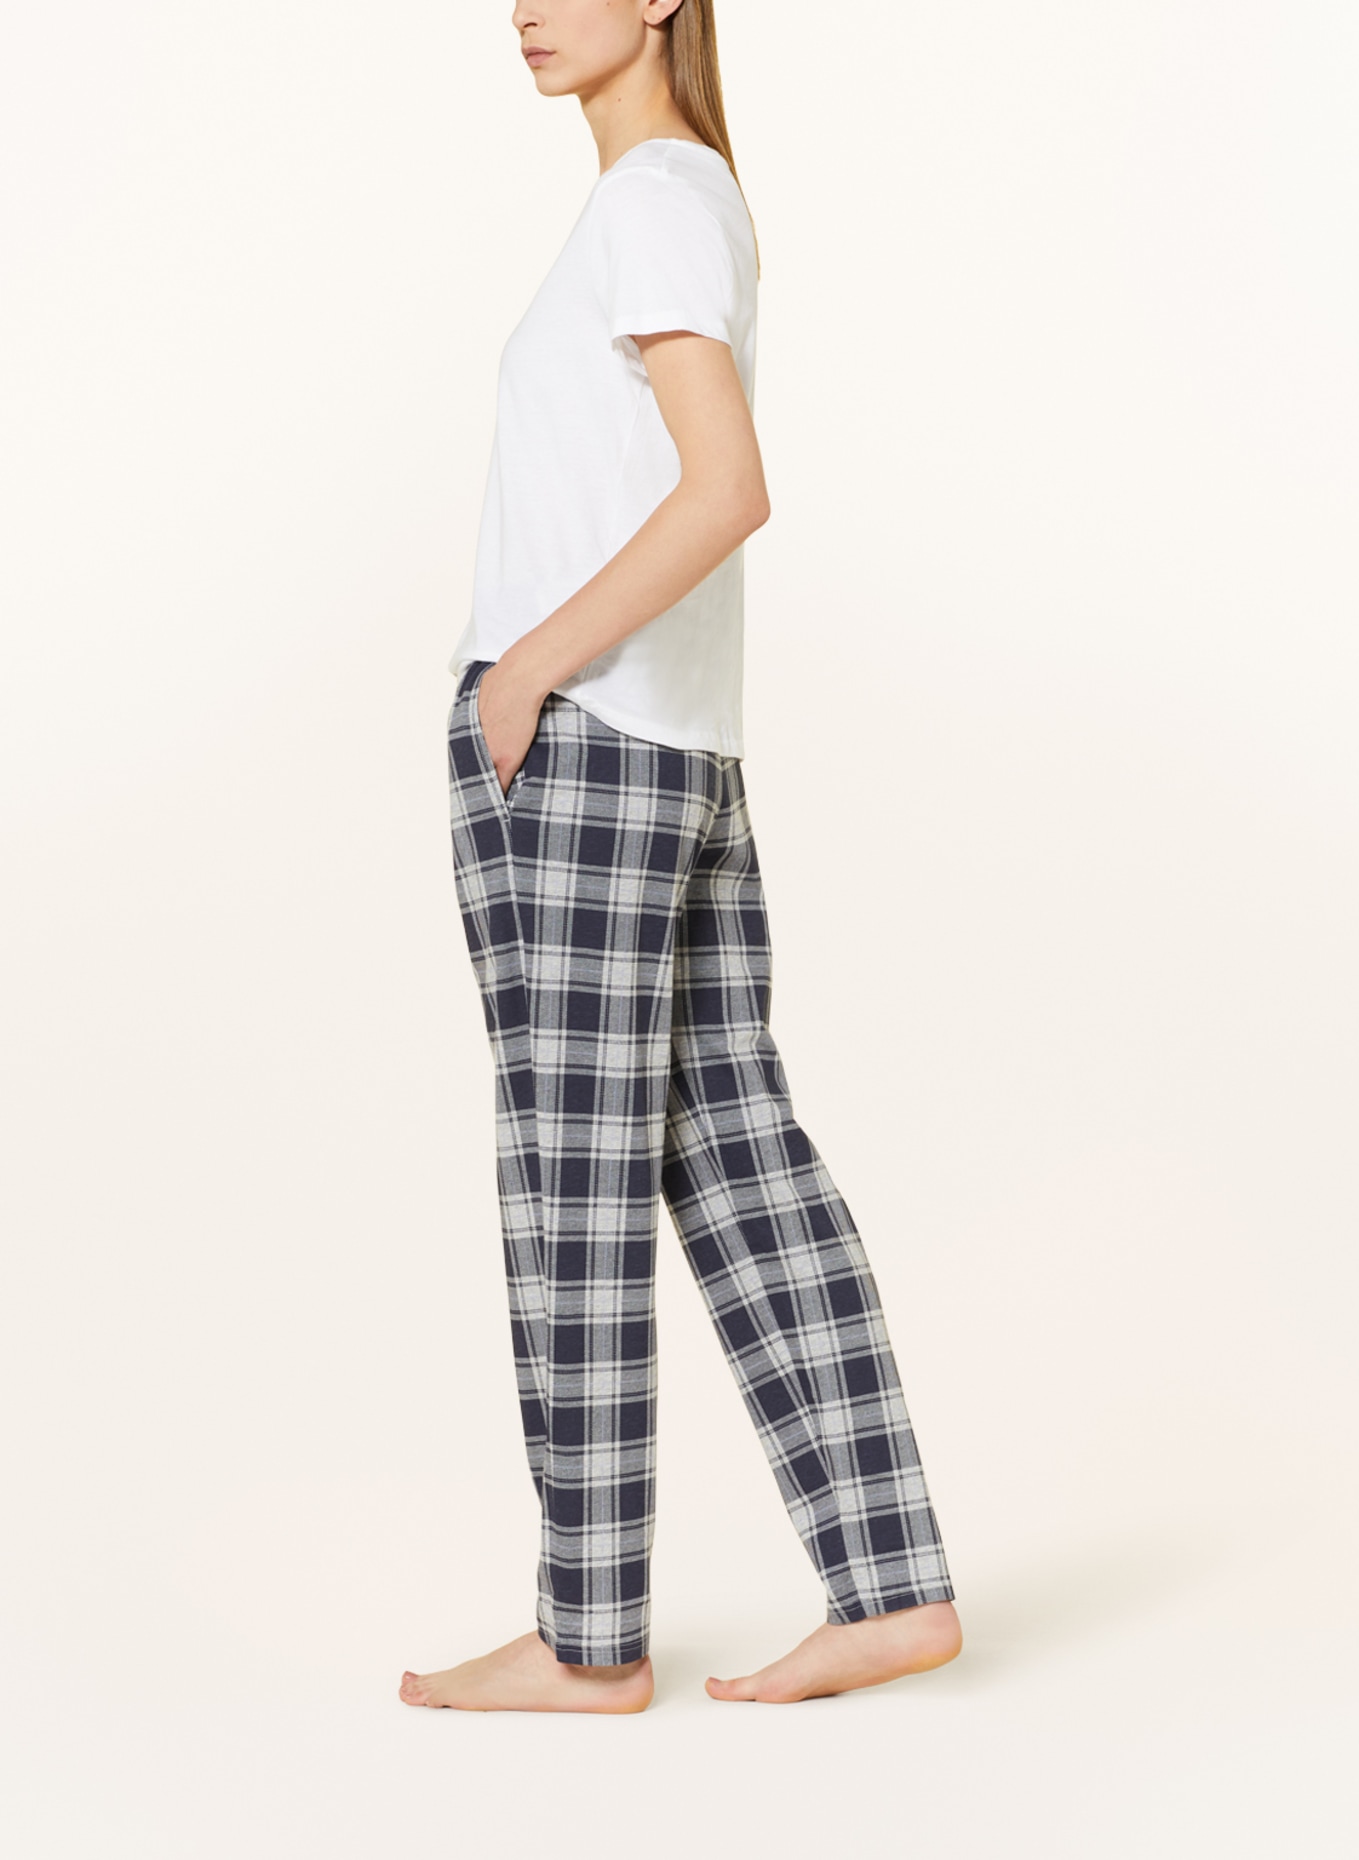 SCHIESSER Pajama pants MIX+RELAX in blue/ blue light